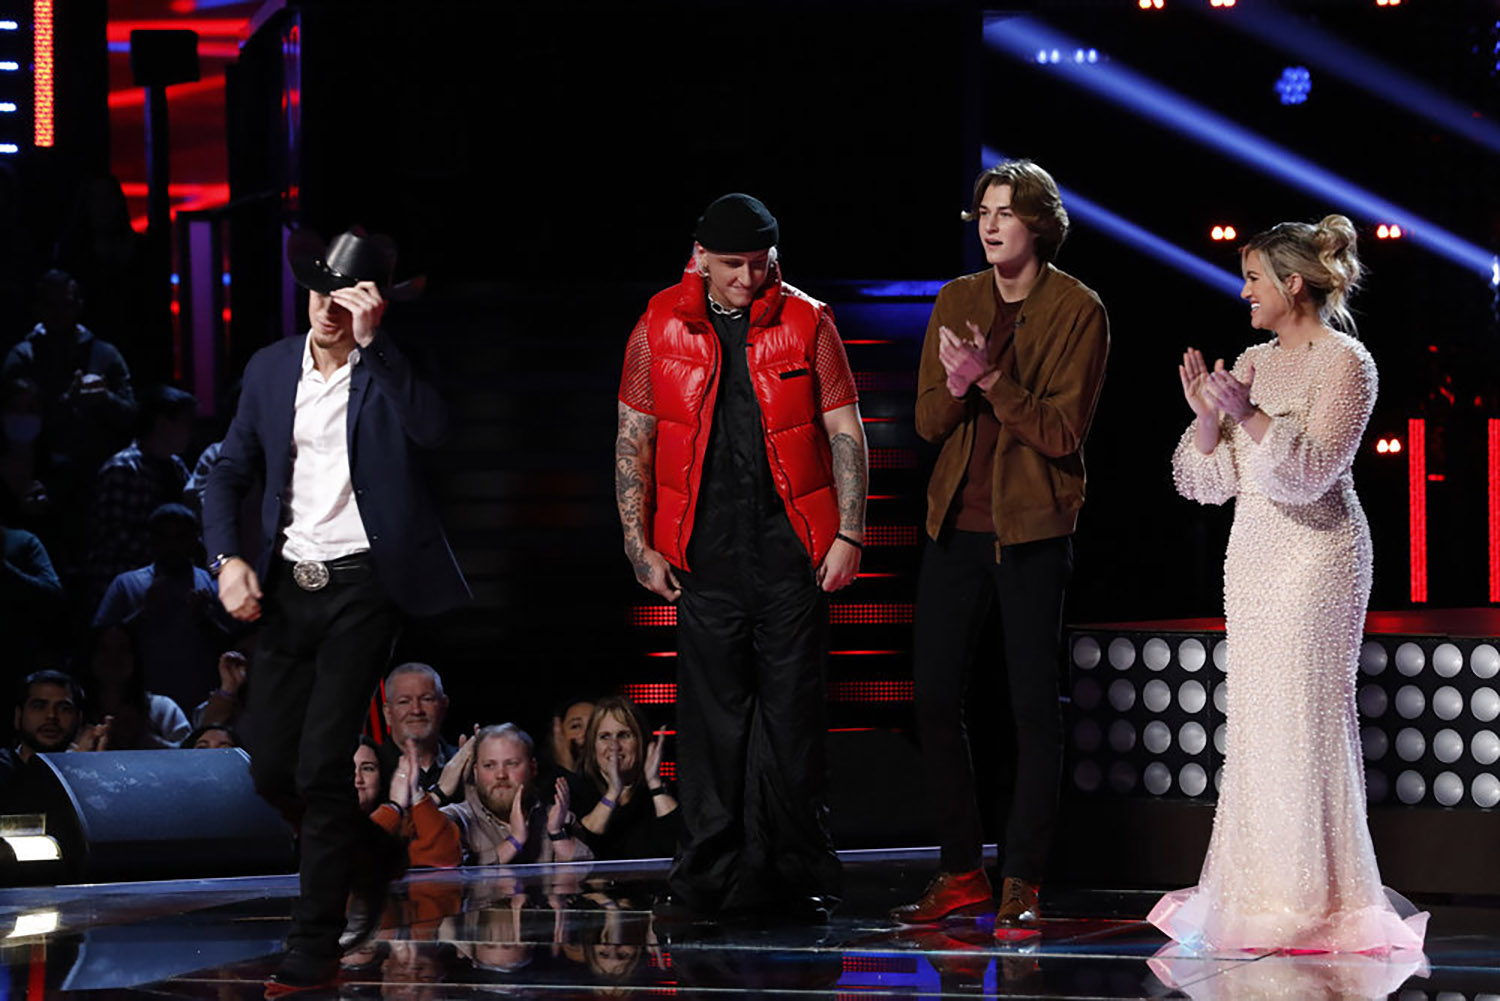 Bryce Leatherwood, Bodie, Brayden Lape, and Morgan Myles, who made it to the Top 5 on The Voice 2022.